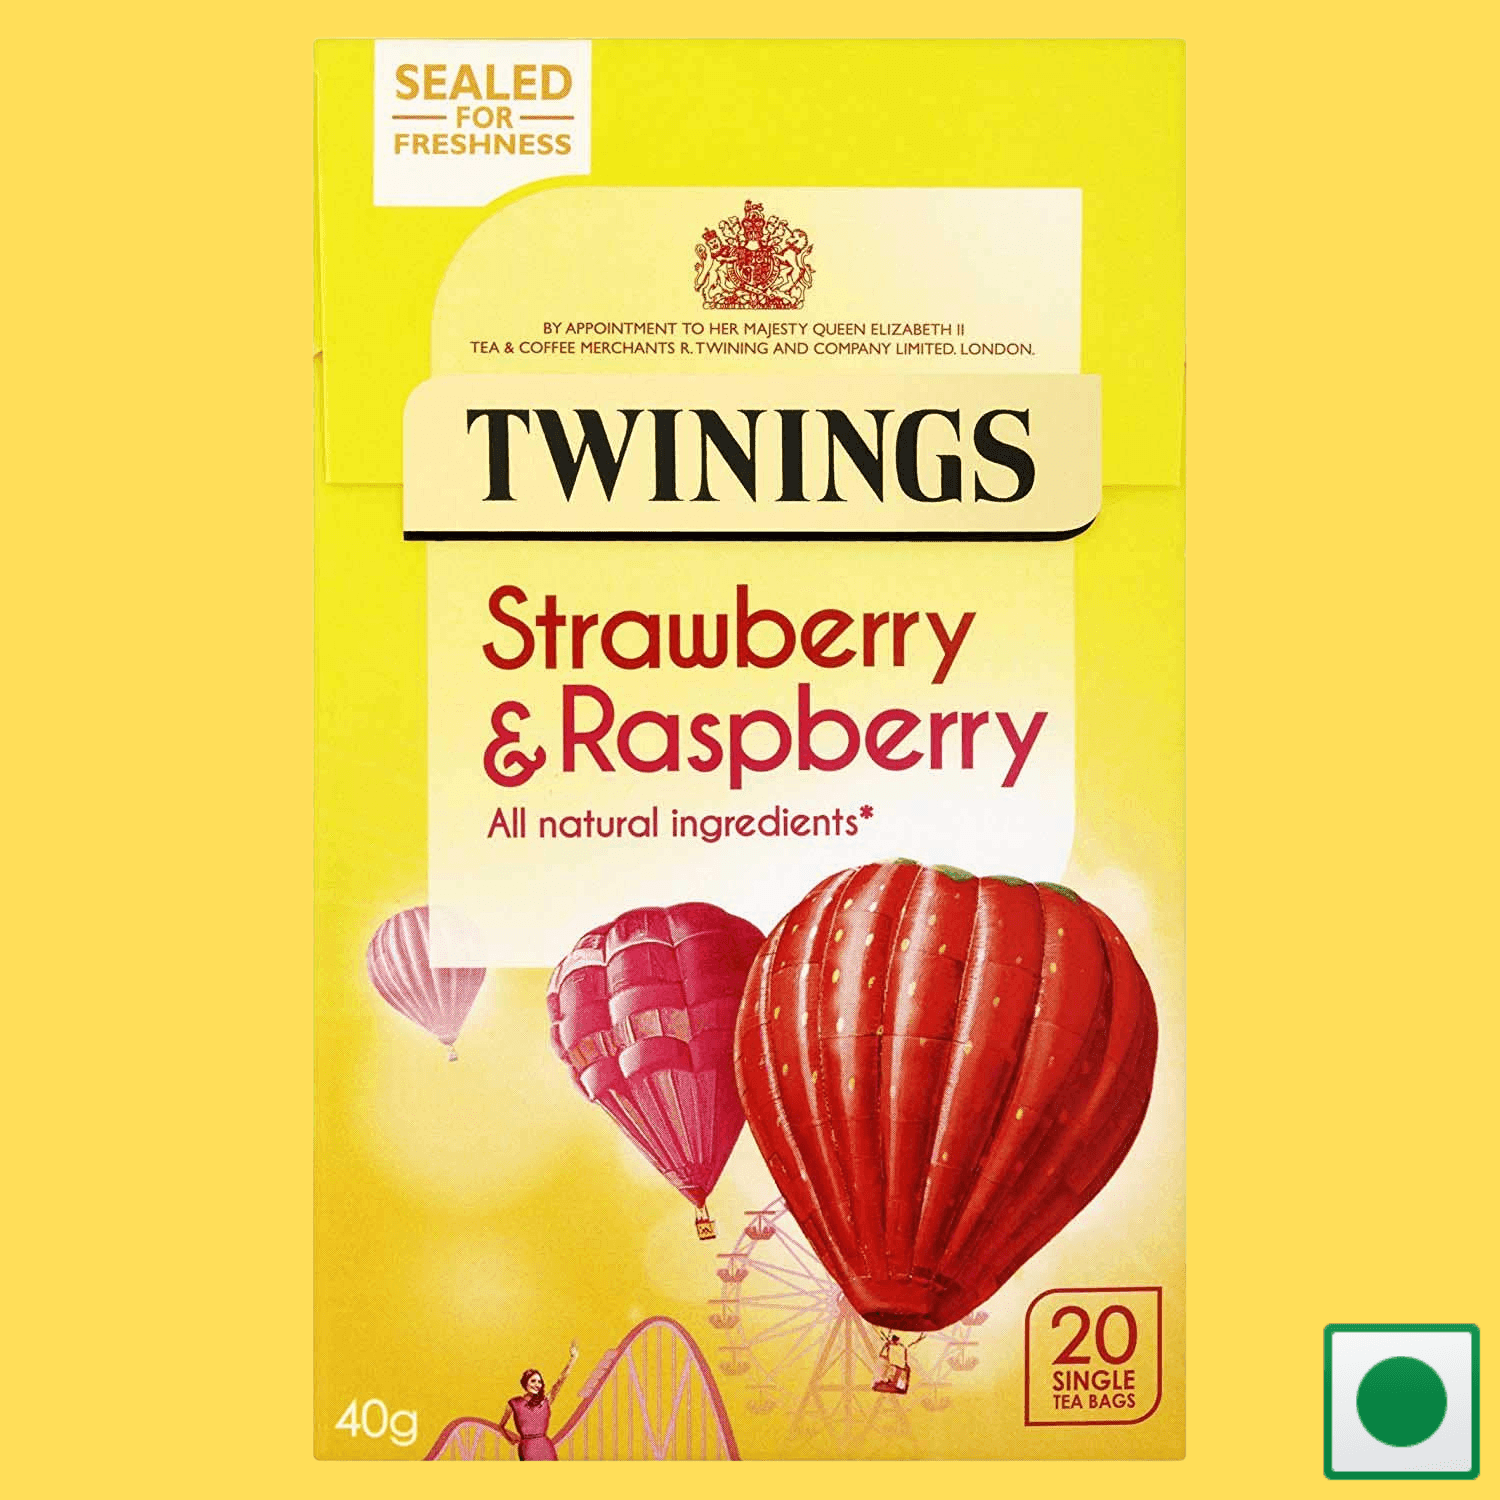 Twinings Strawberry & Raspberry 20 Tea bags-40g (Imported) - Super 7 Mart